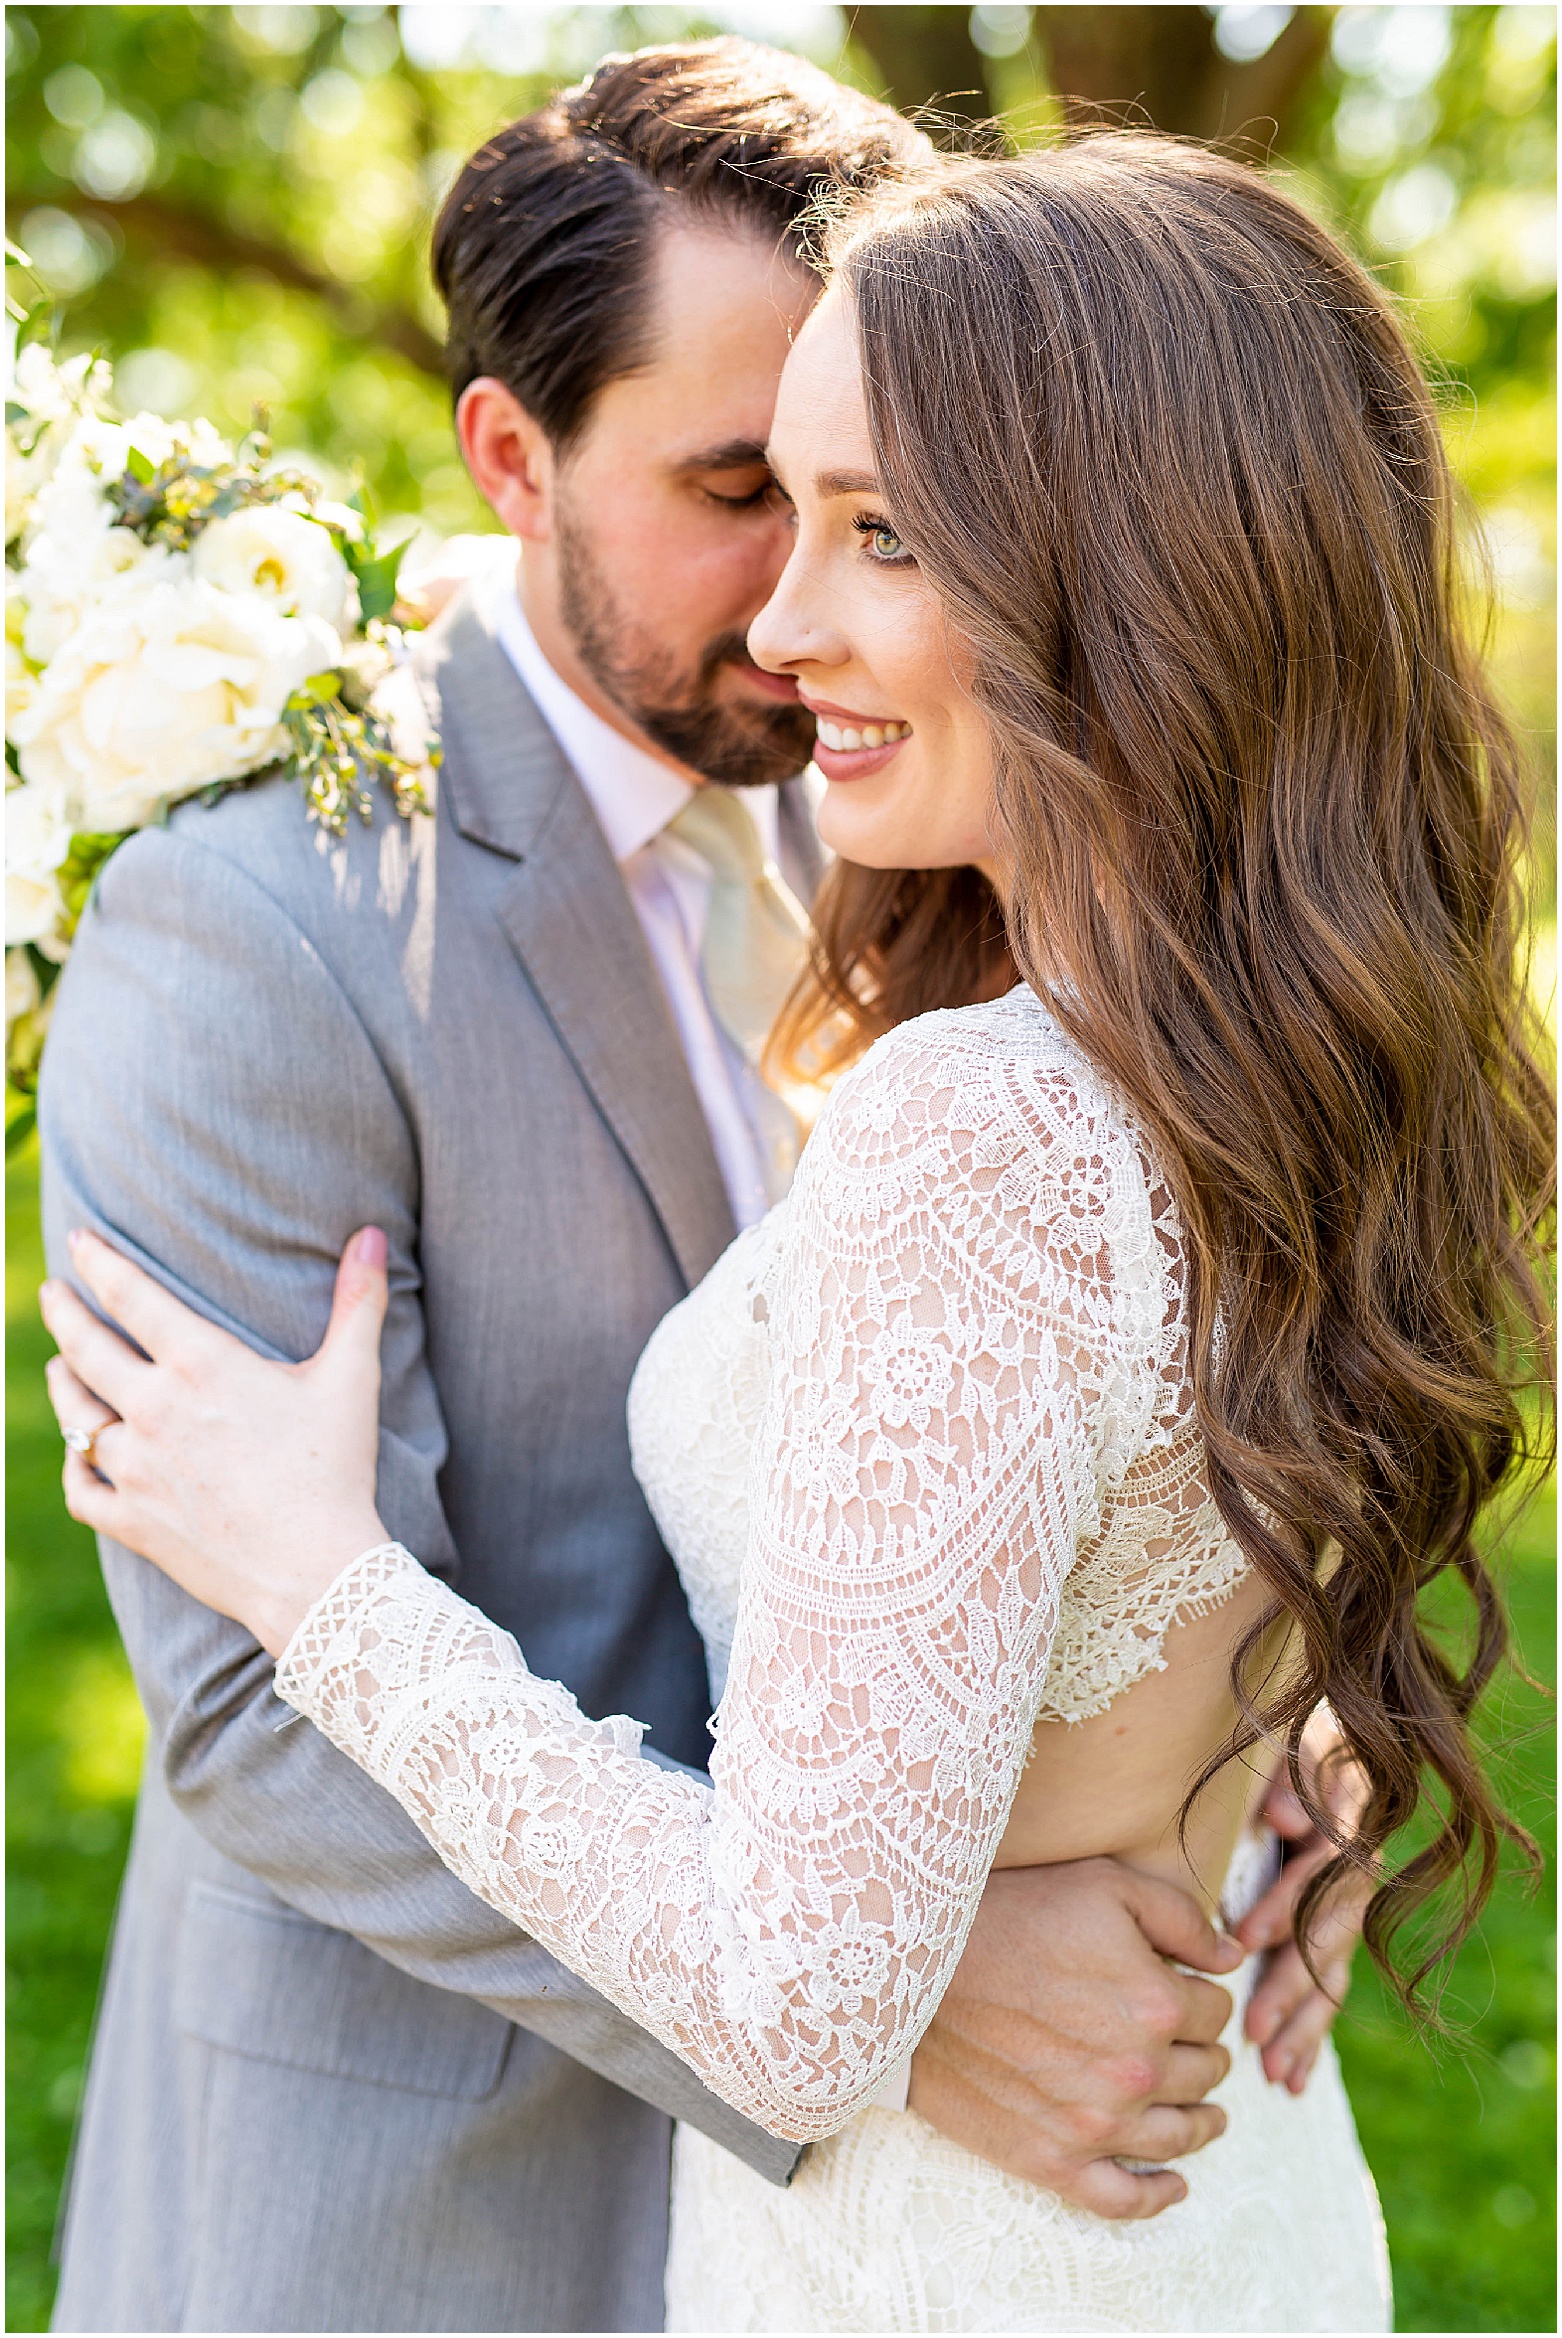 View More: http://hopetaylorphotographyphotos.pass.us/ashley-and-wythe